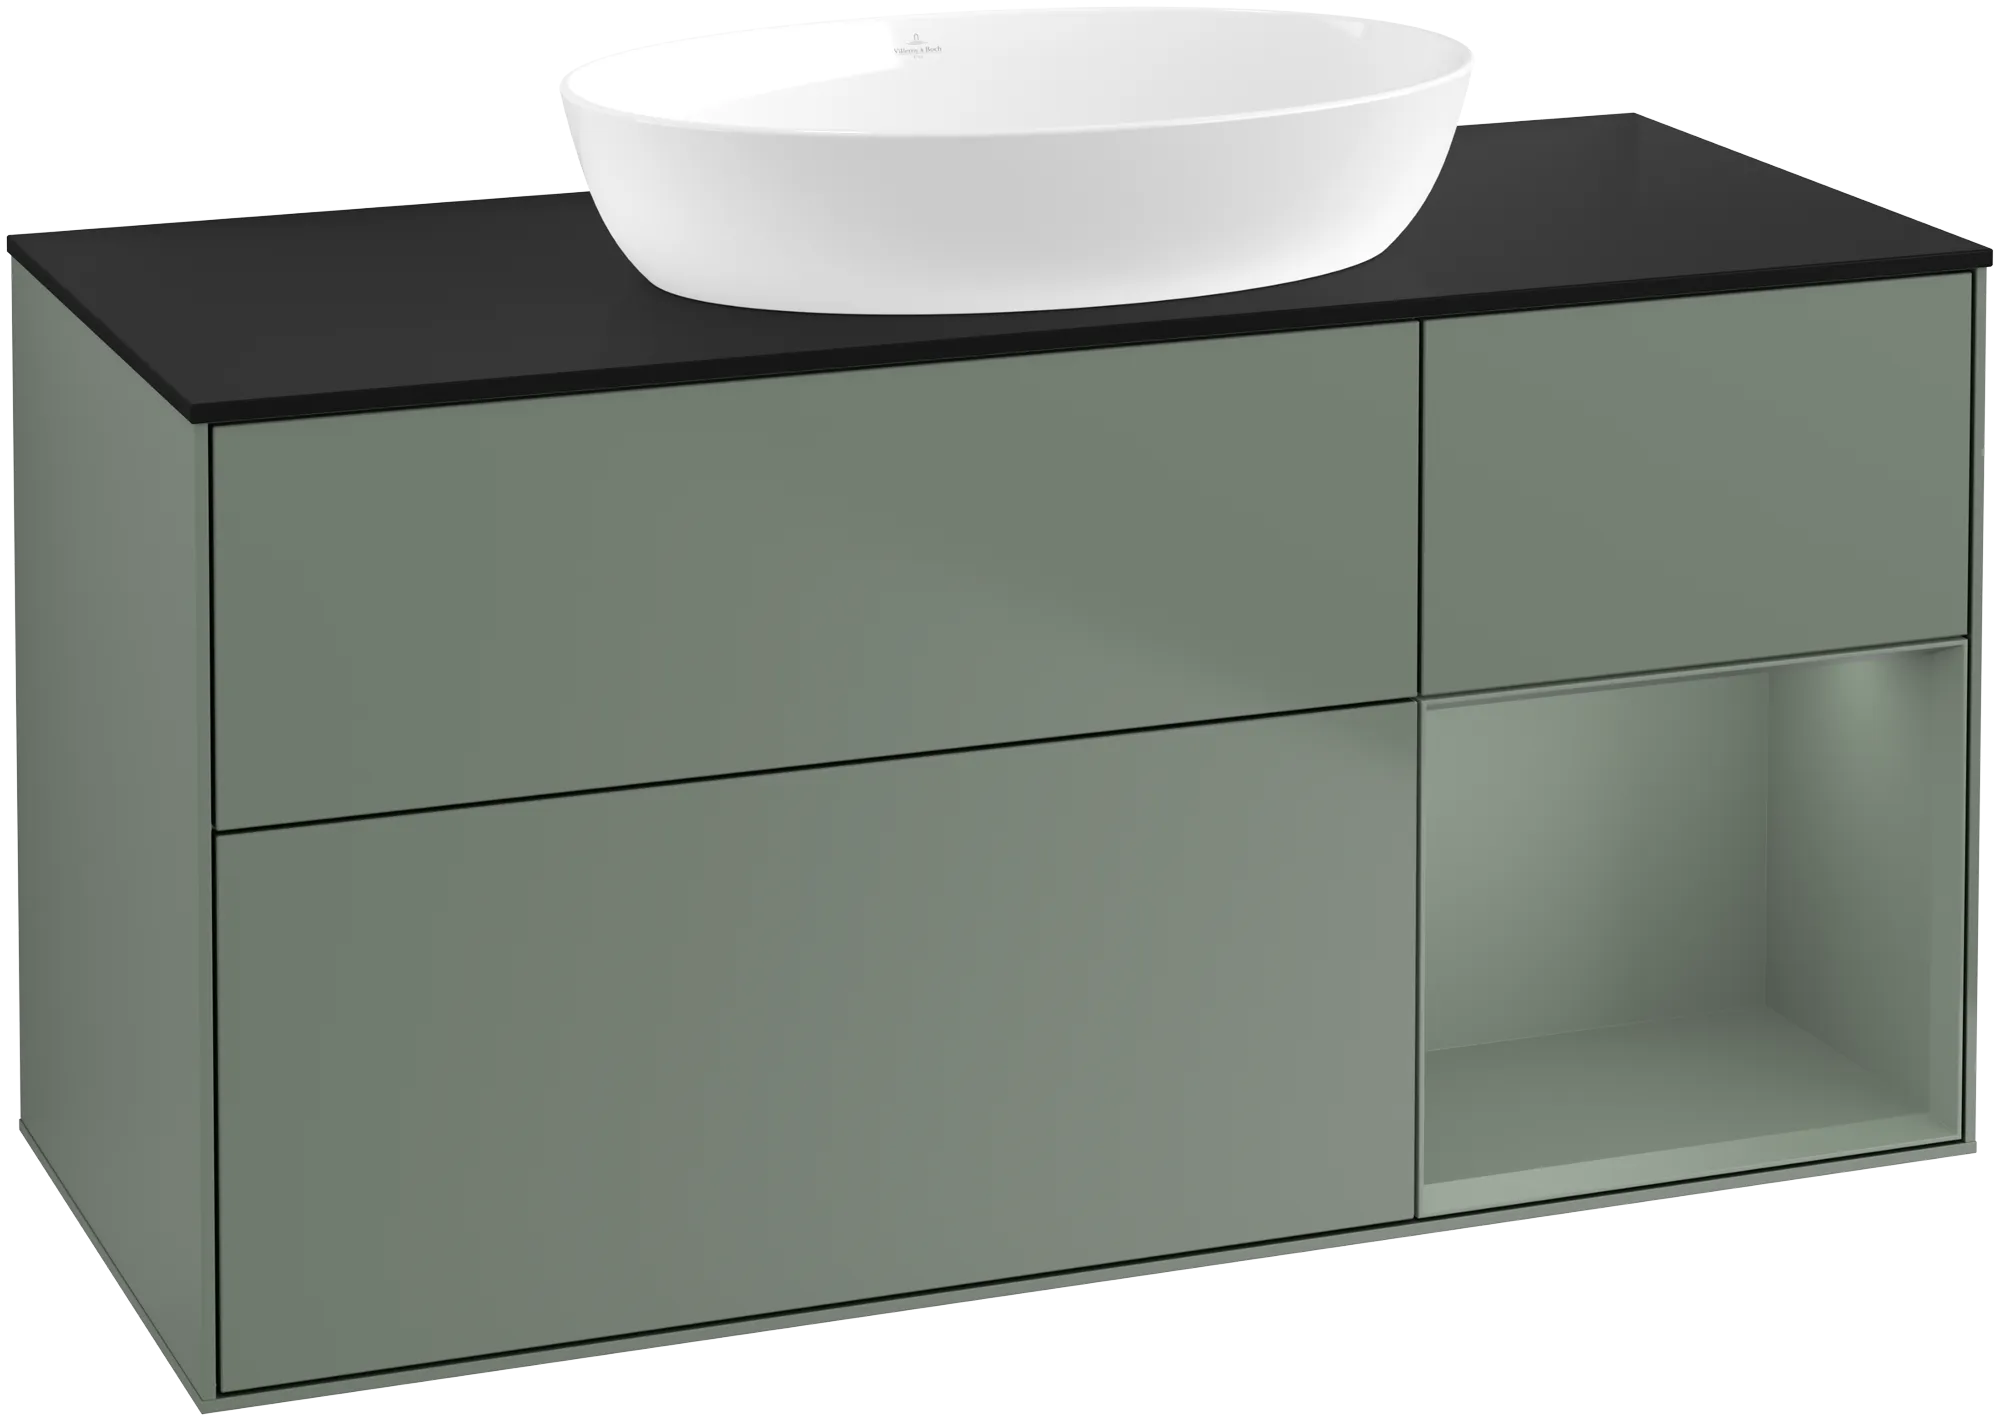 Obrázek VILLEROY BOCH Finion Vanity unit, with lighting, 3 pull-out compartments, 1200 x 603 x 501 mm, Olive Matt Lacquer / Olive Matt Lacquer / Glass Black Matt #GA72GMGM